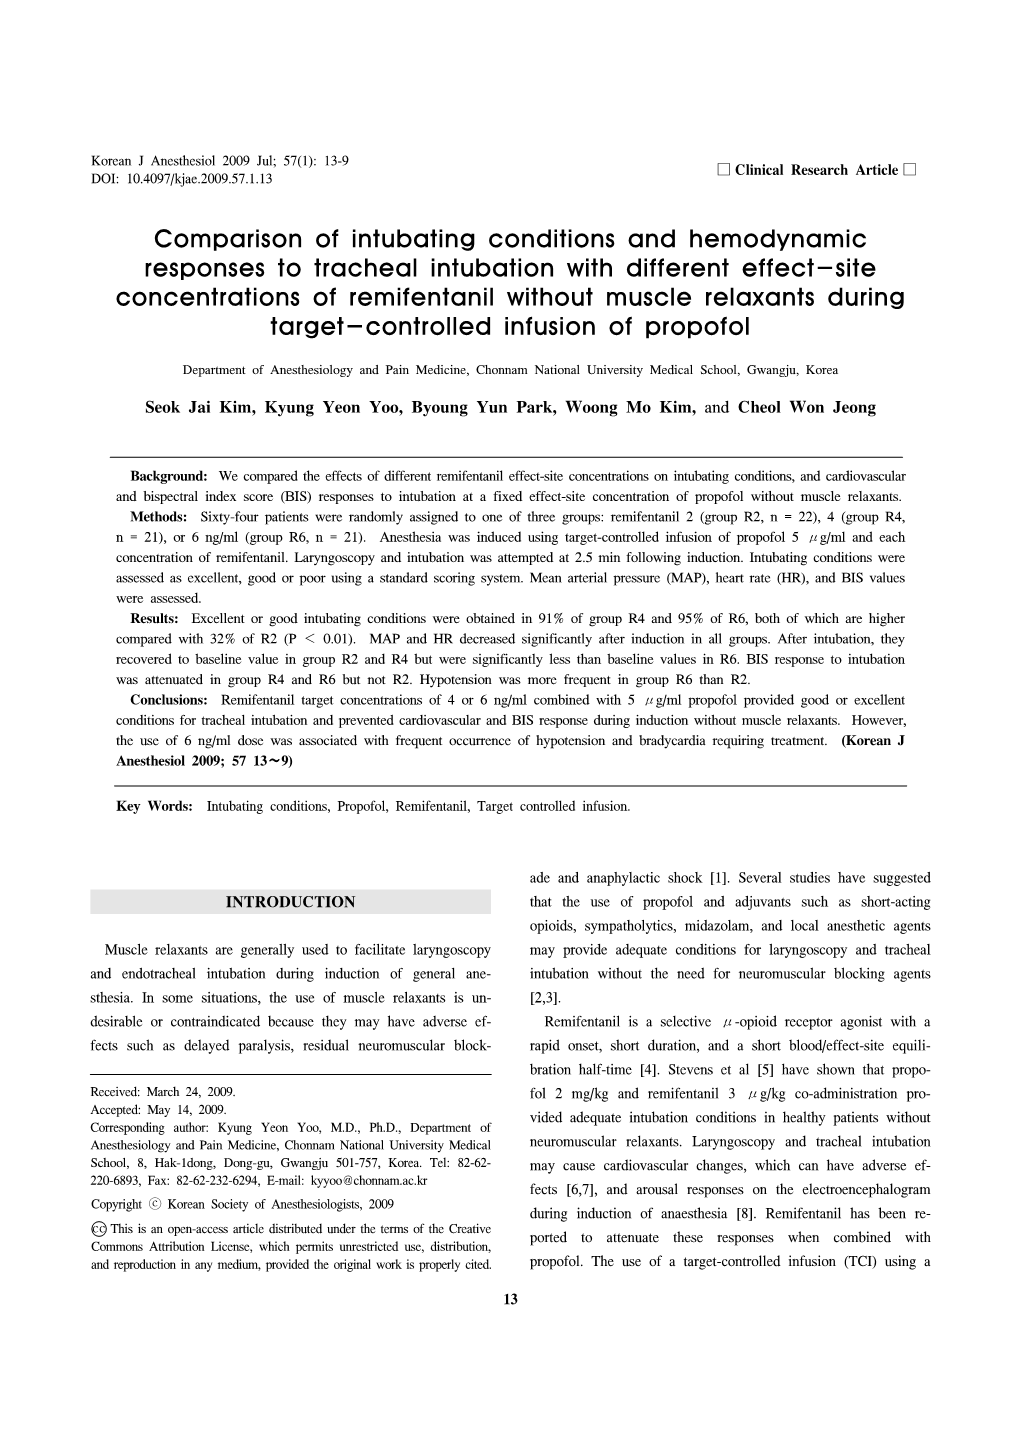 Comparison of Intubating Conditions and Hemodynamic Responses To